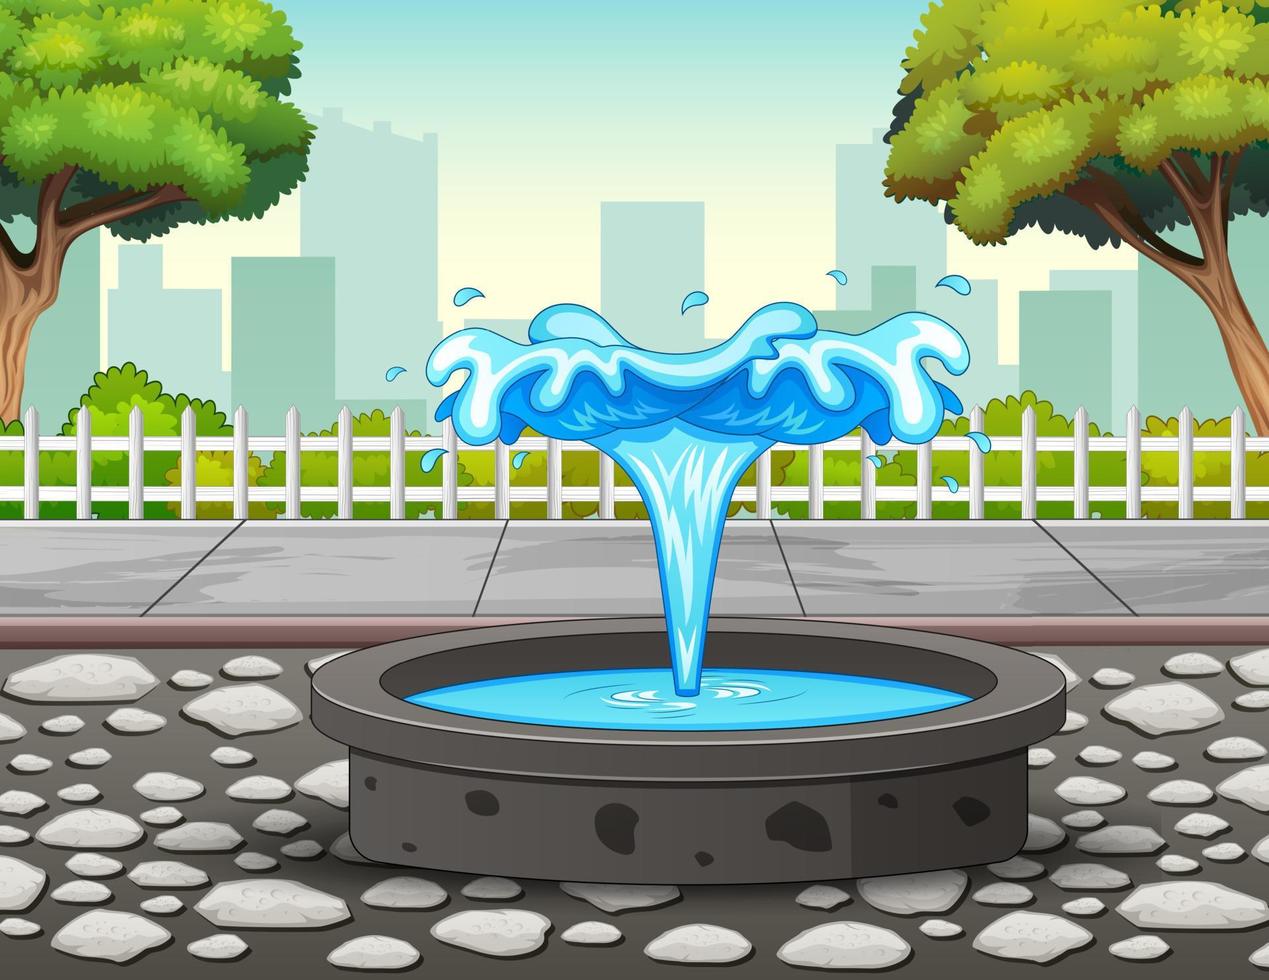 Illustration of the fountain on the city park vector